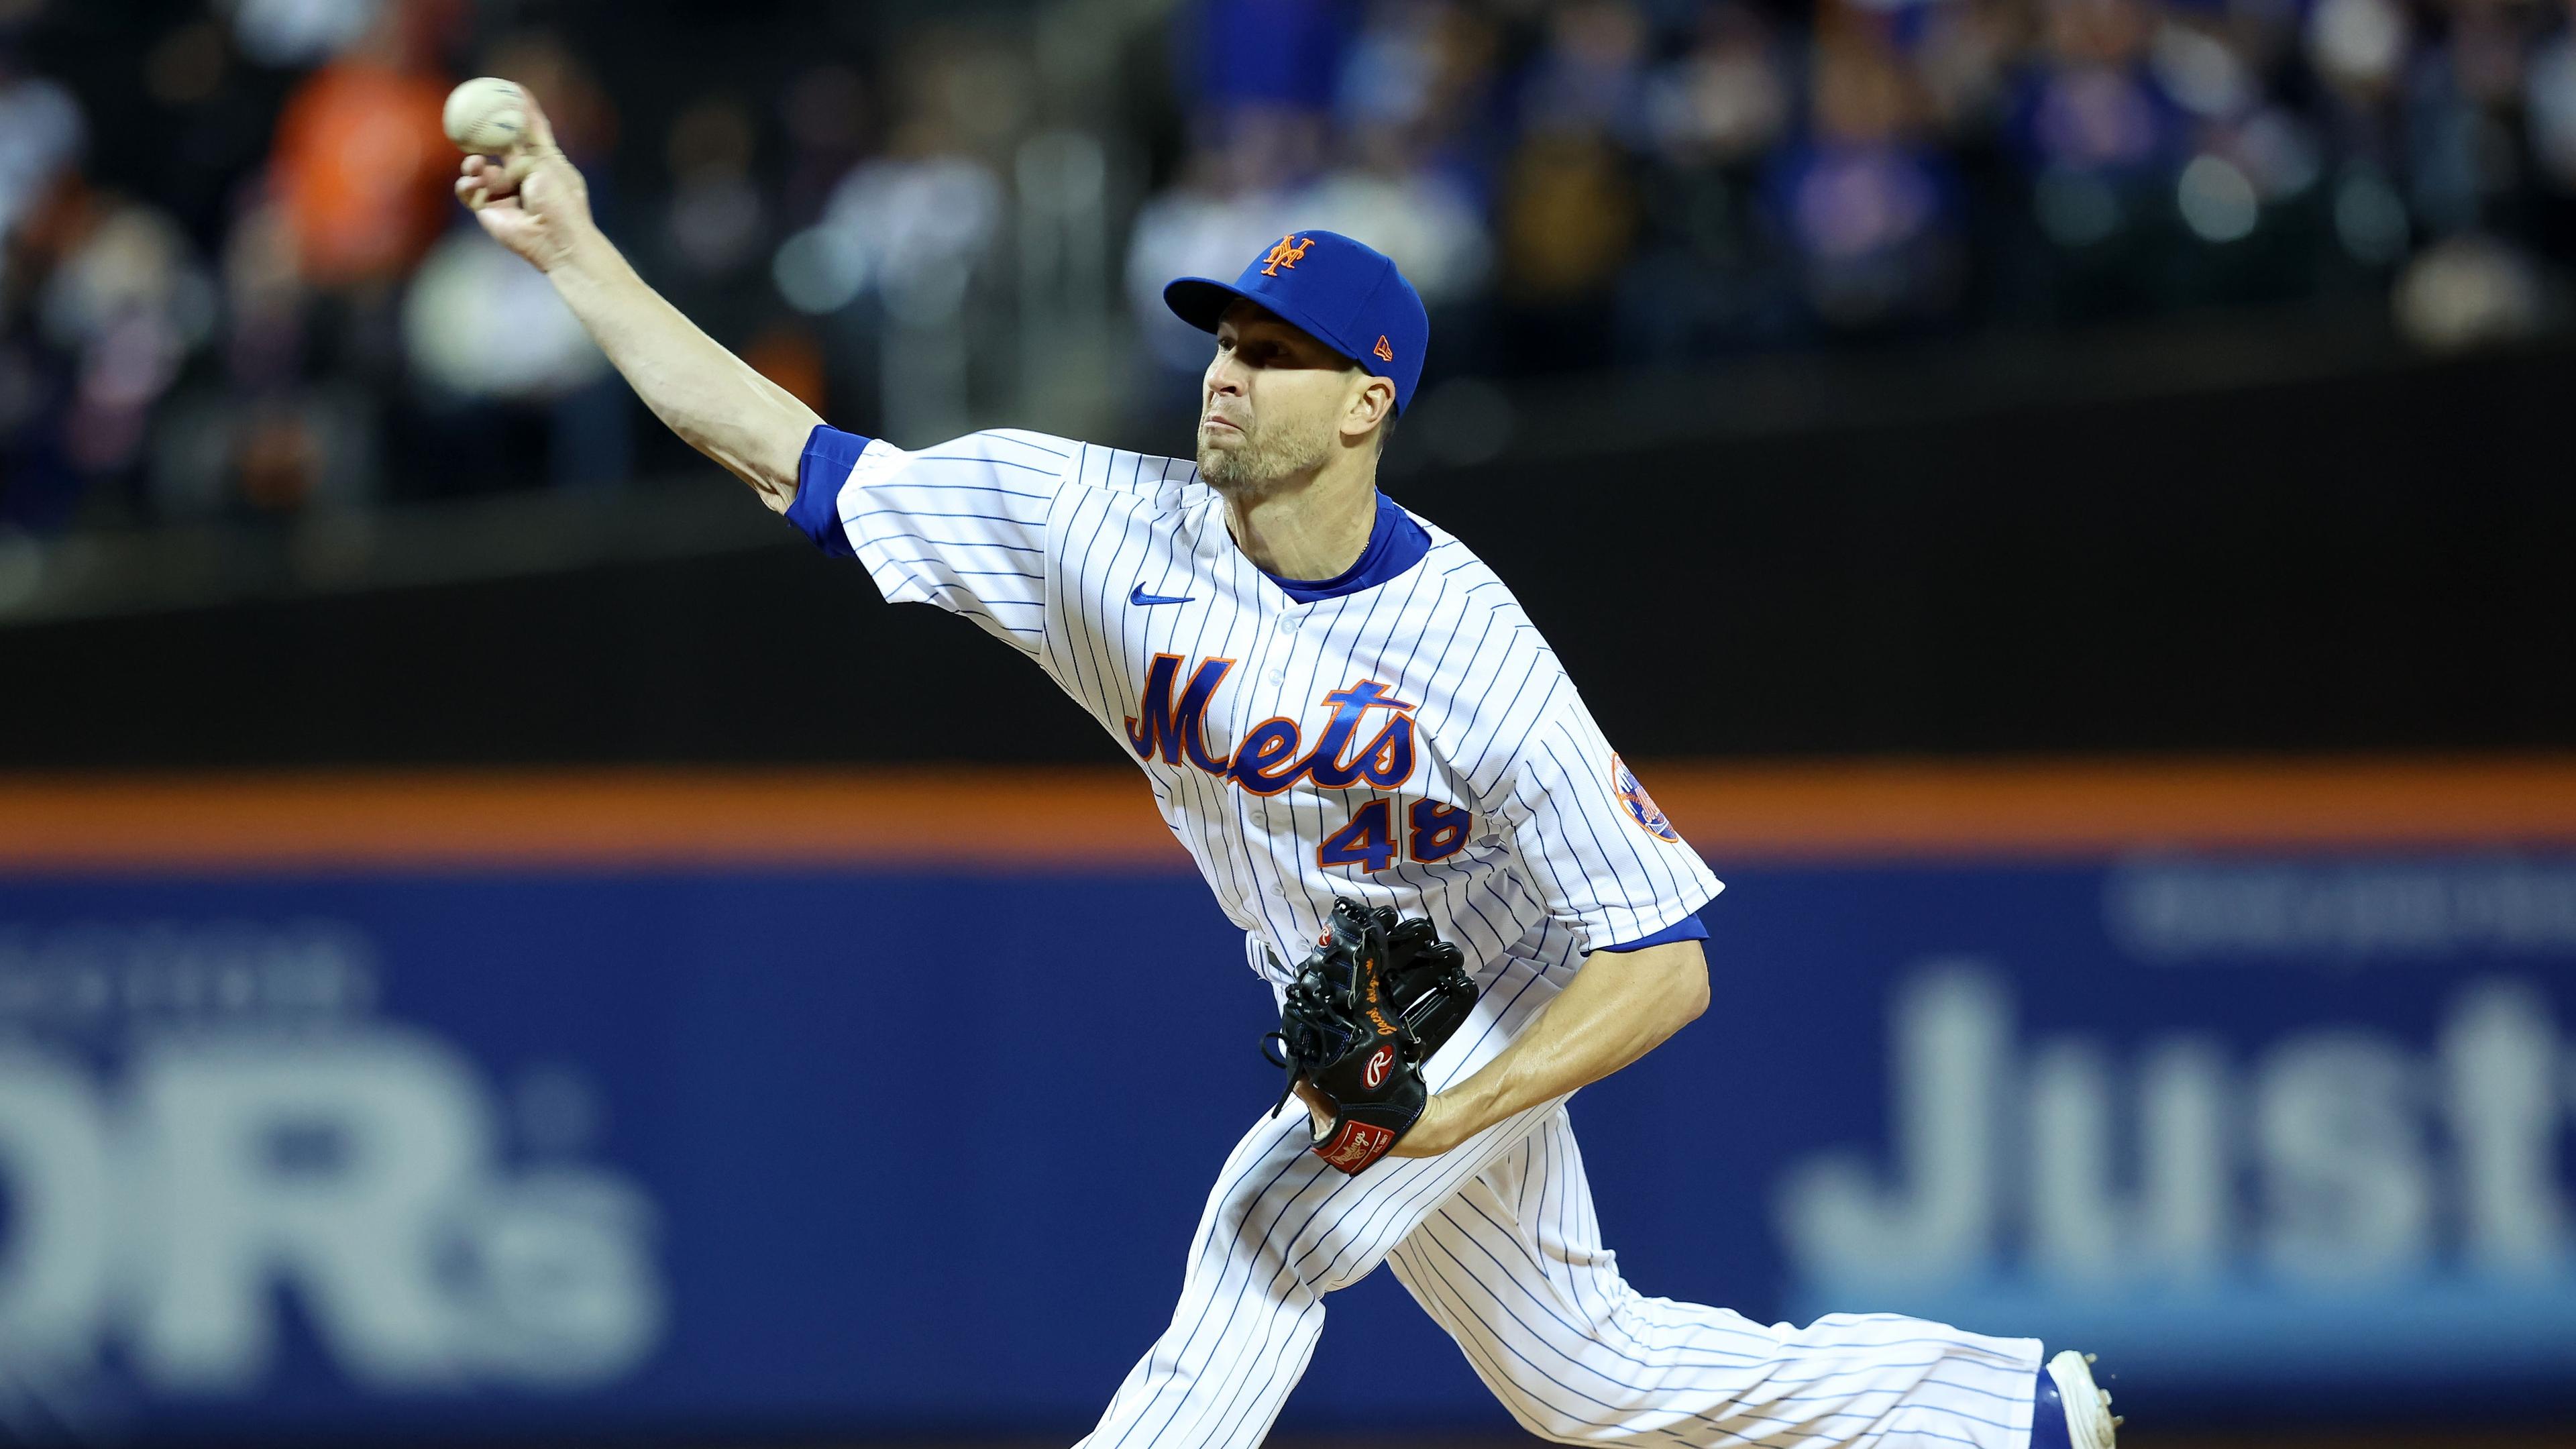 Oct 8, 2022; New York City, New York, USA; New York Mets starting pitcher Jacob deGrom (48) throws a pitch in the first inning during game two of the Wild Card series against the San Diego Padres for the 2022 MLB Playoffs at Citi Field. Mandatory Credit: Brad Penner-USA TODAY Sports / © Brad Penner-USA TODAY Sports